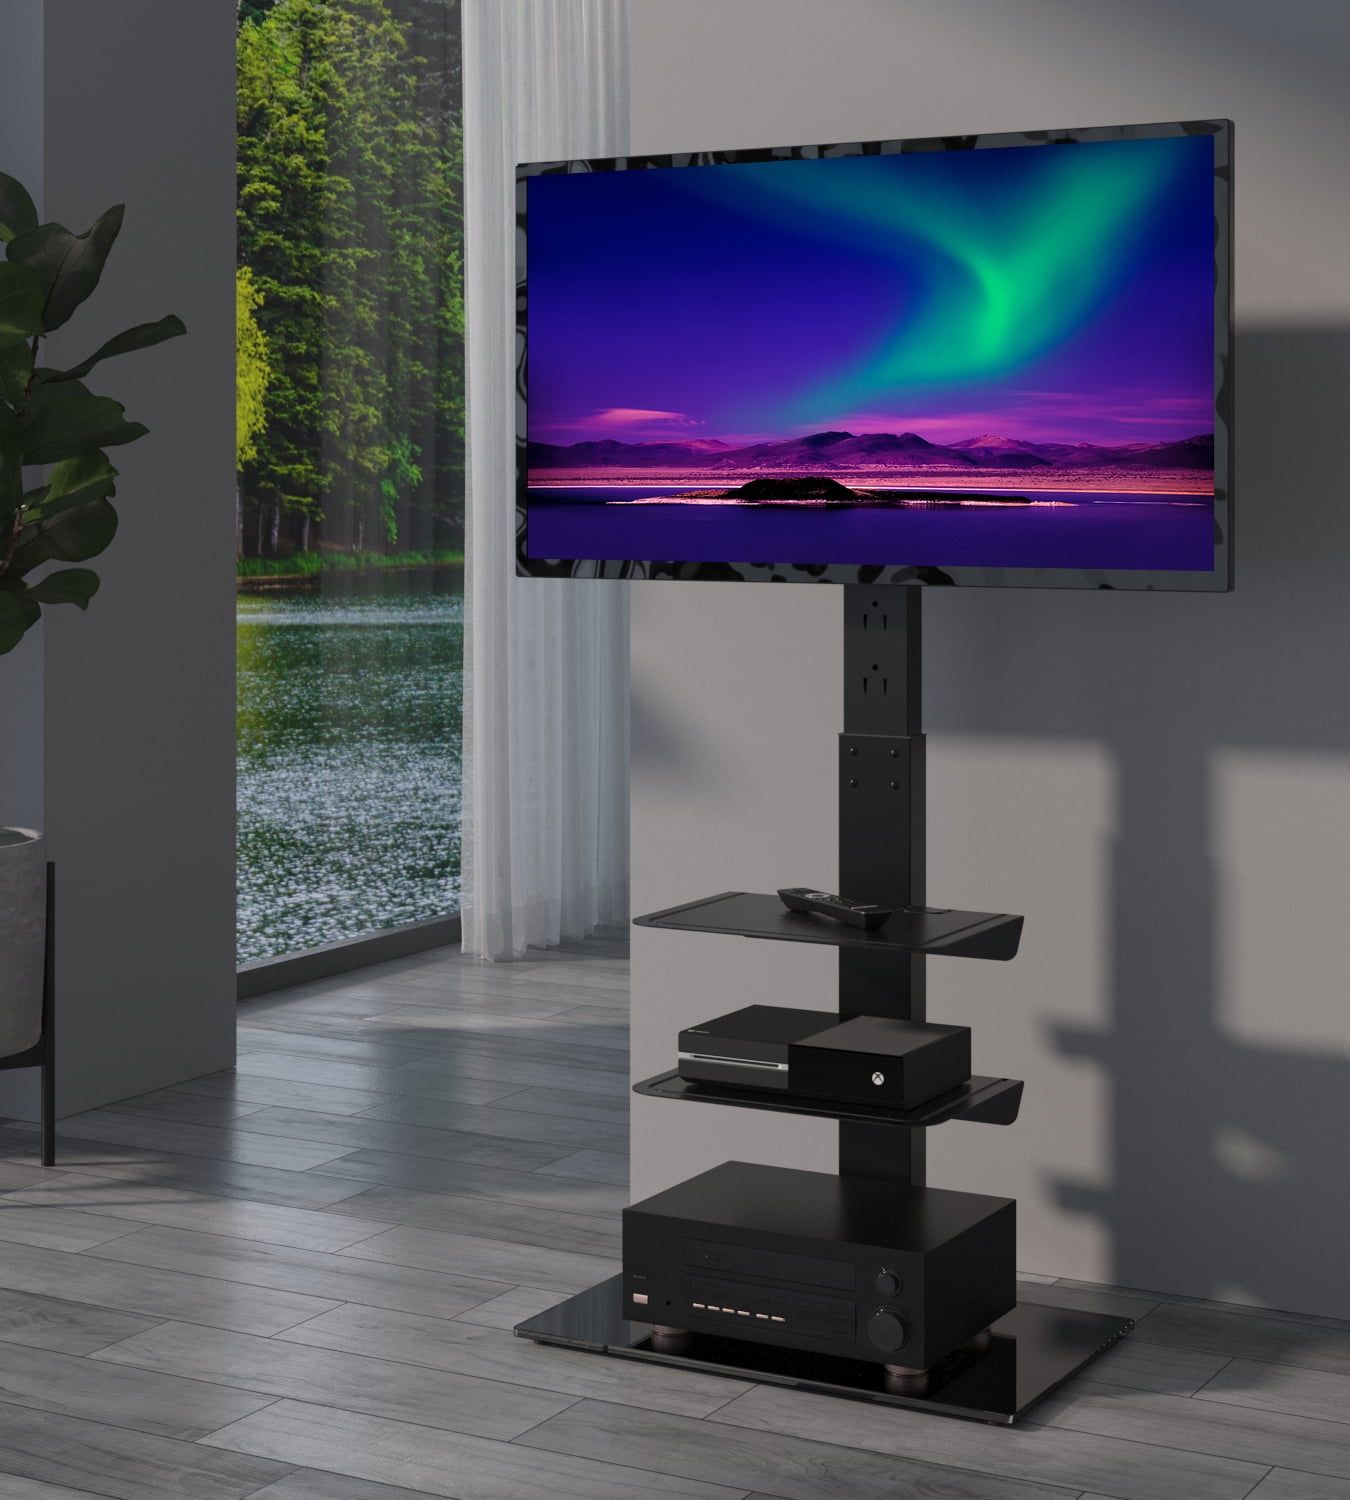 Universal Swivel Floor Tv Stand With Mount Height Adjustable For Most Throughout Universal Floor Tv Stands (View 3 of 20)